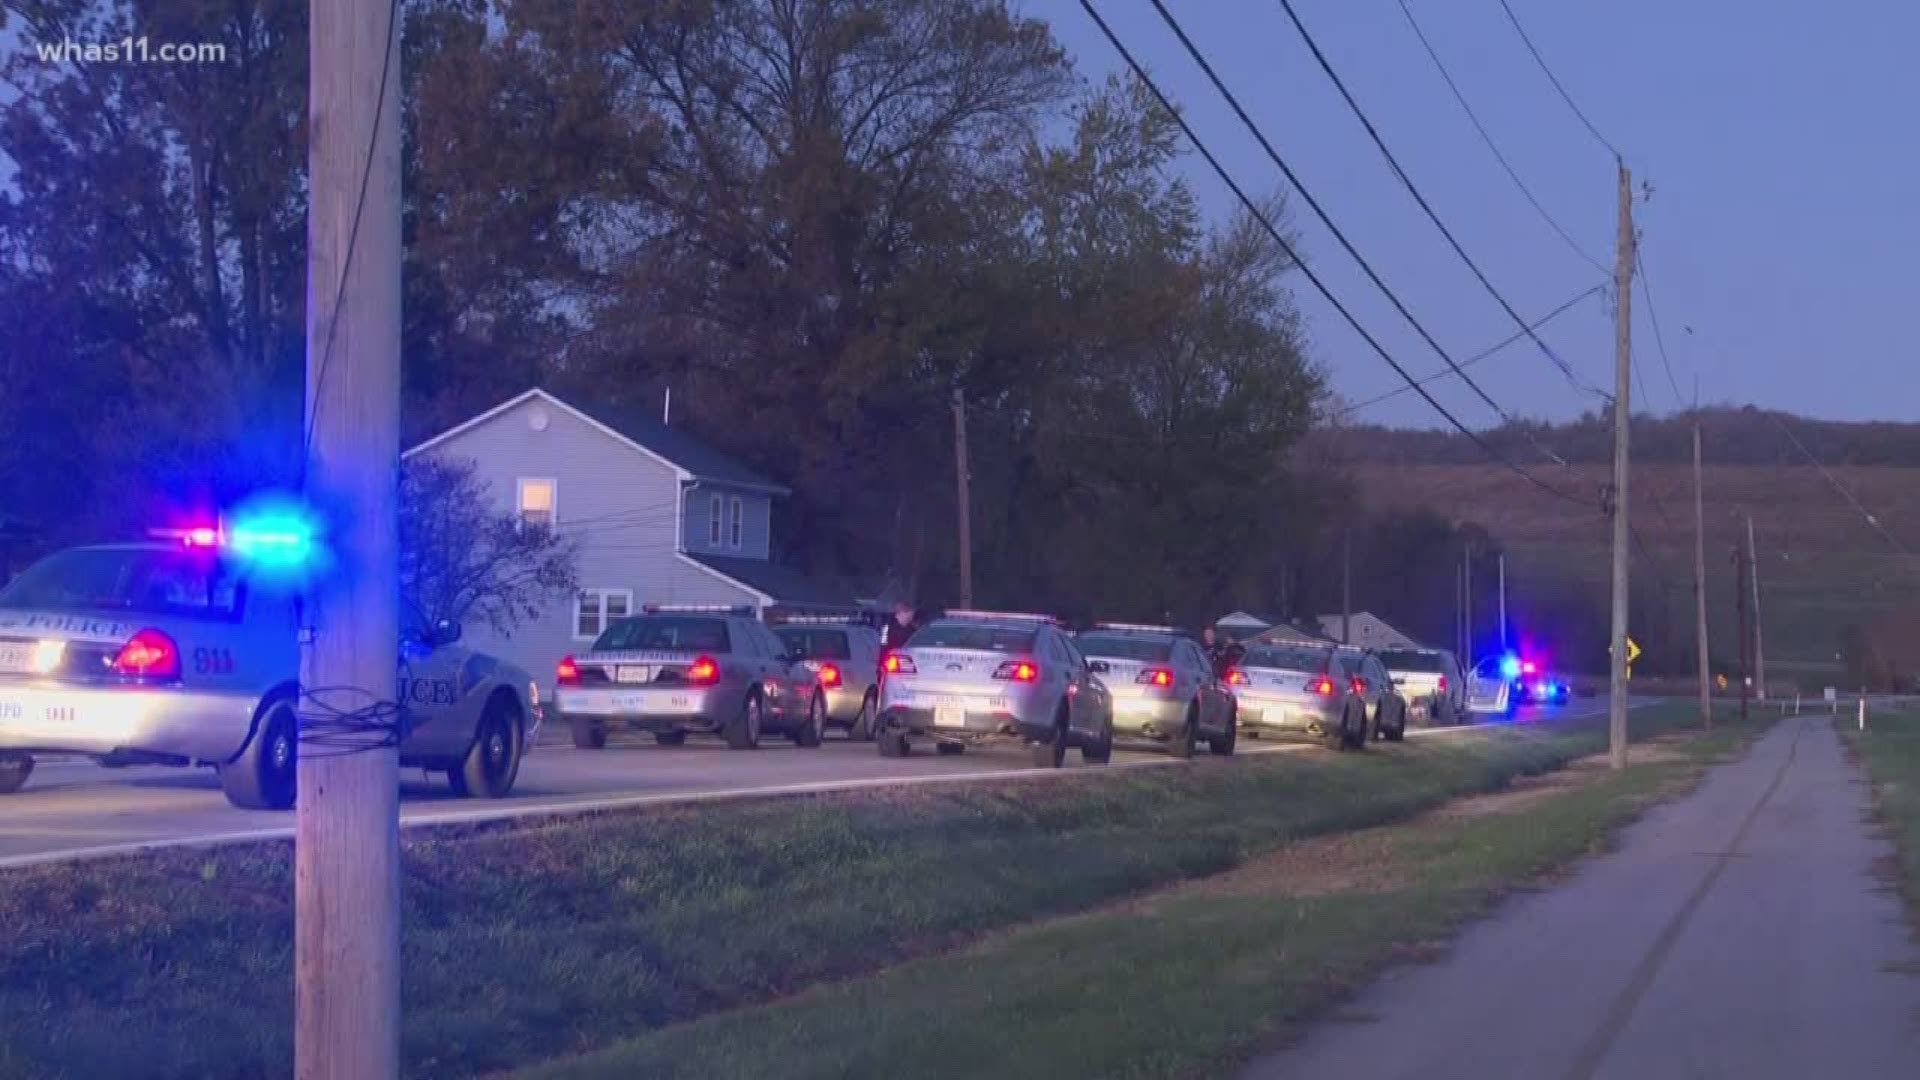 An early morning police chase in Indiana crossed into Kentucky, ending on Cane Run Road in Louisville.